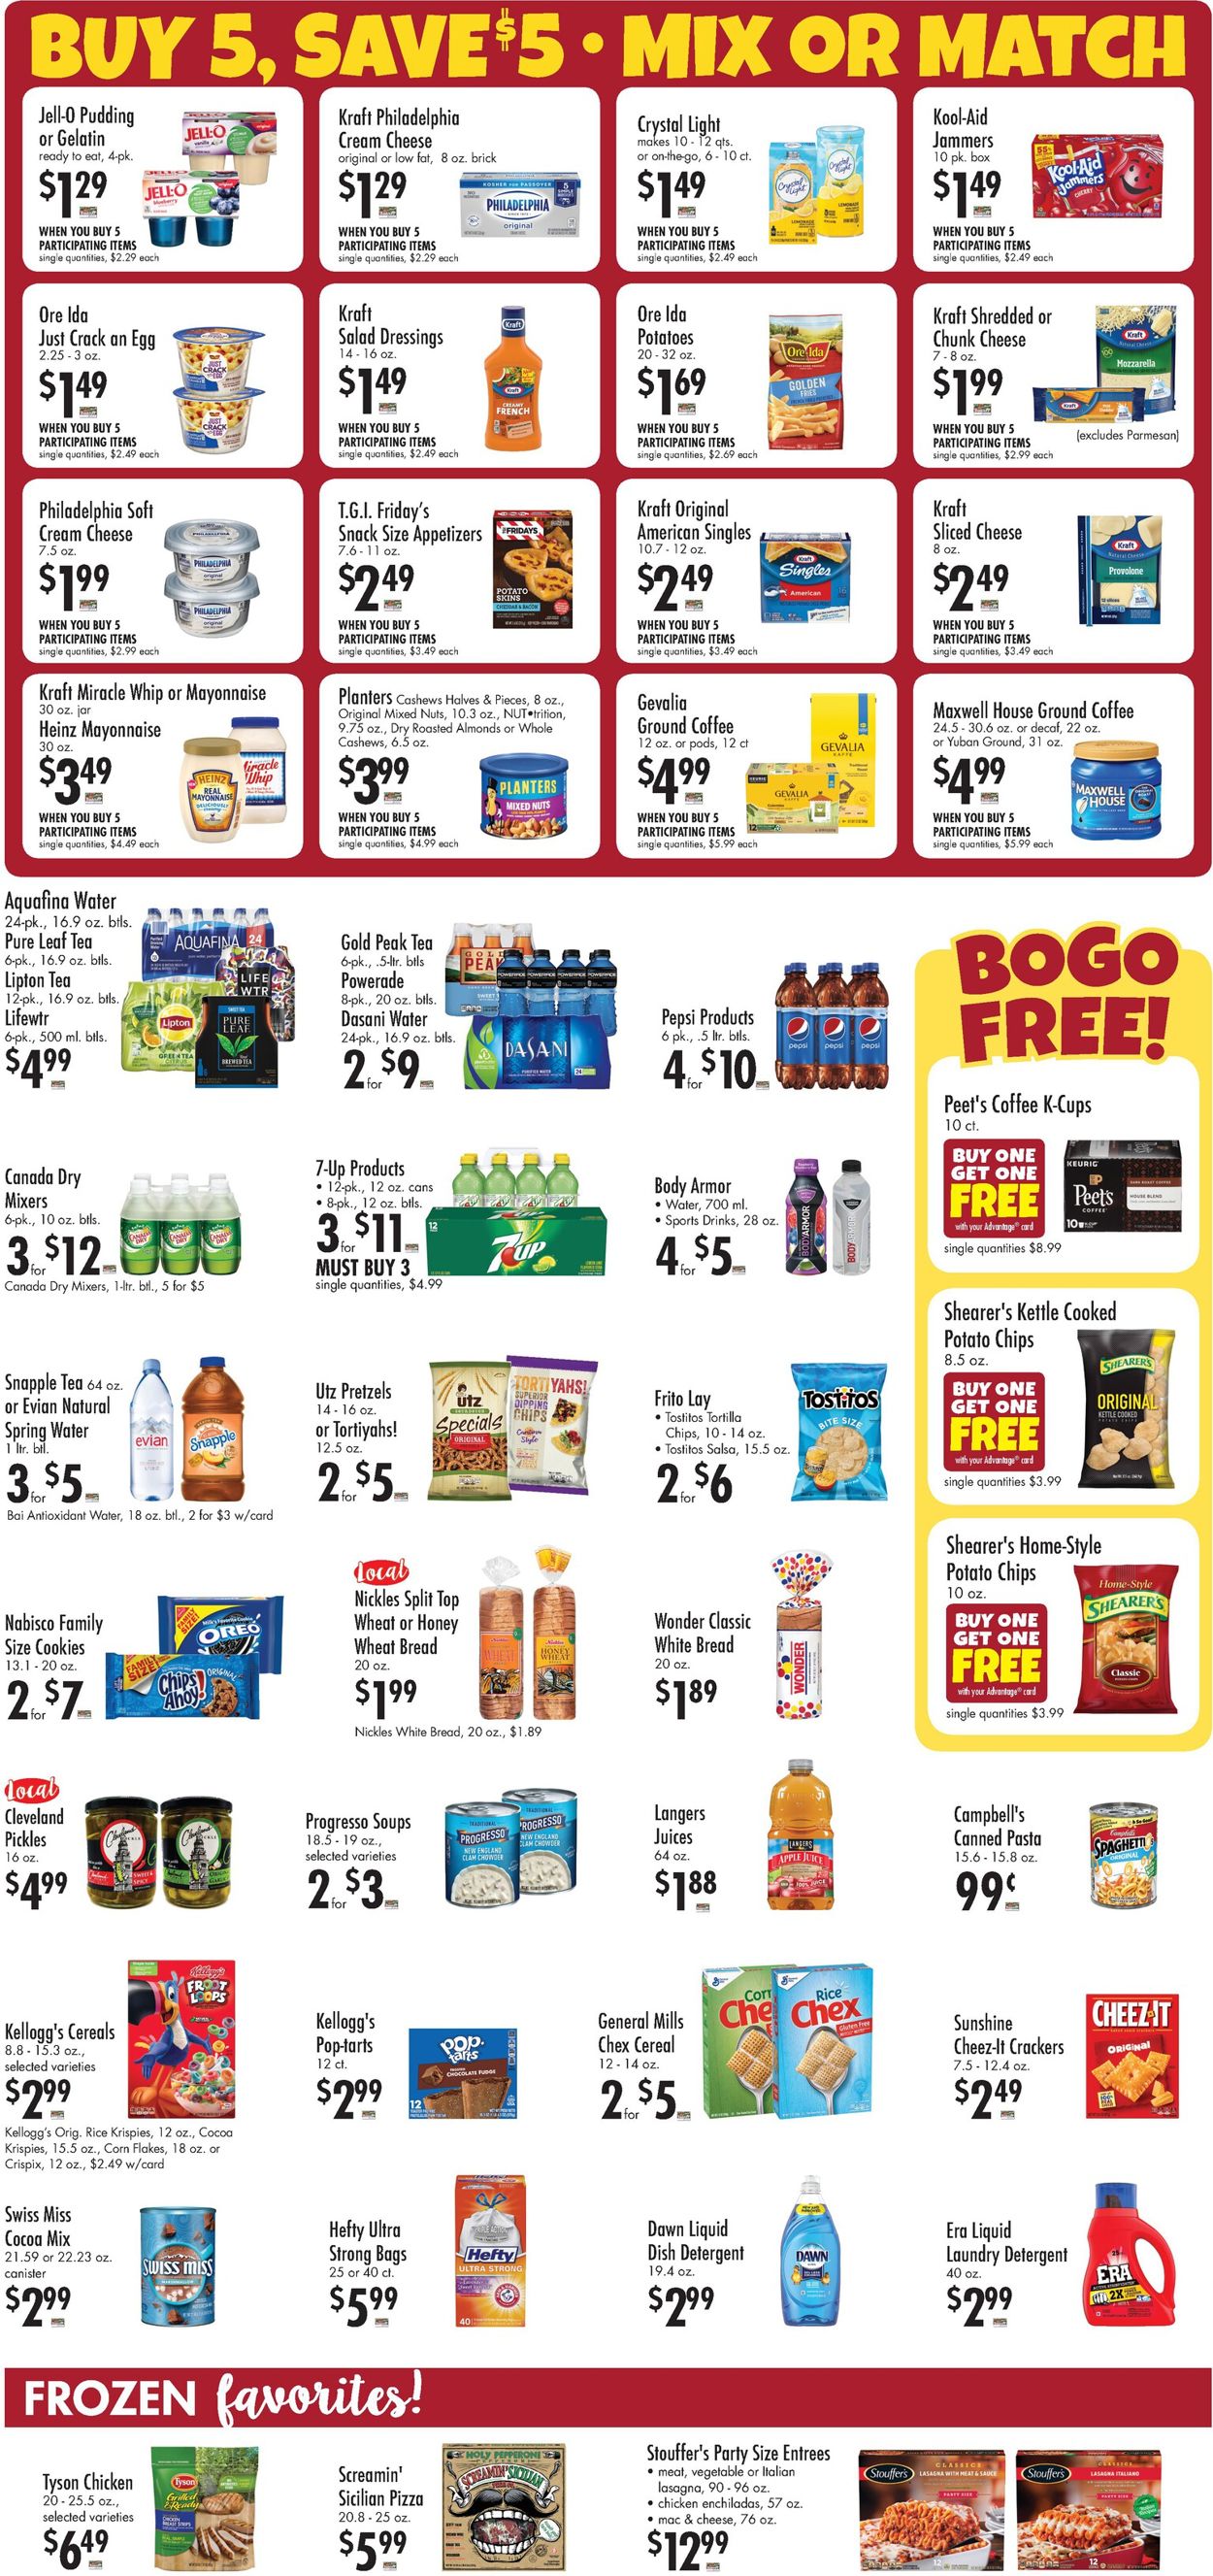 Buehler's Fresh Foods Thanksgiving 2020 Ad Weekly Ad Circular - valid 11/18-11/26/2020 (Page 4)